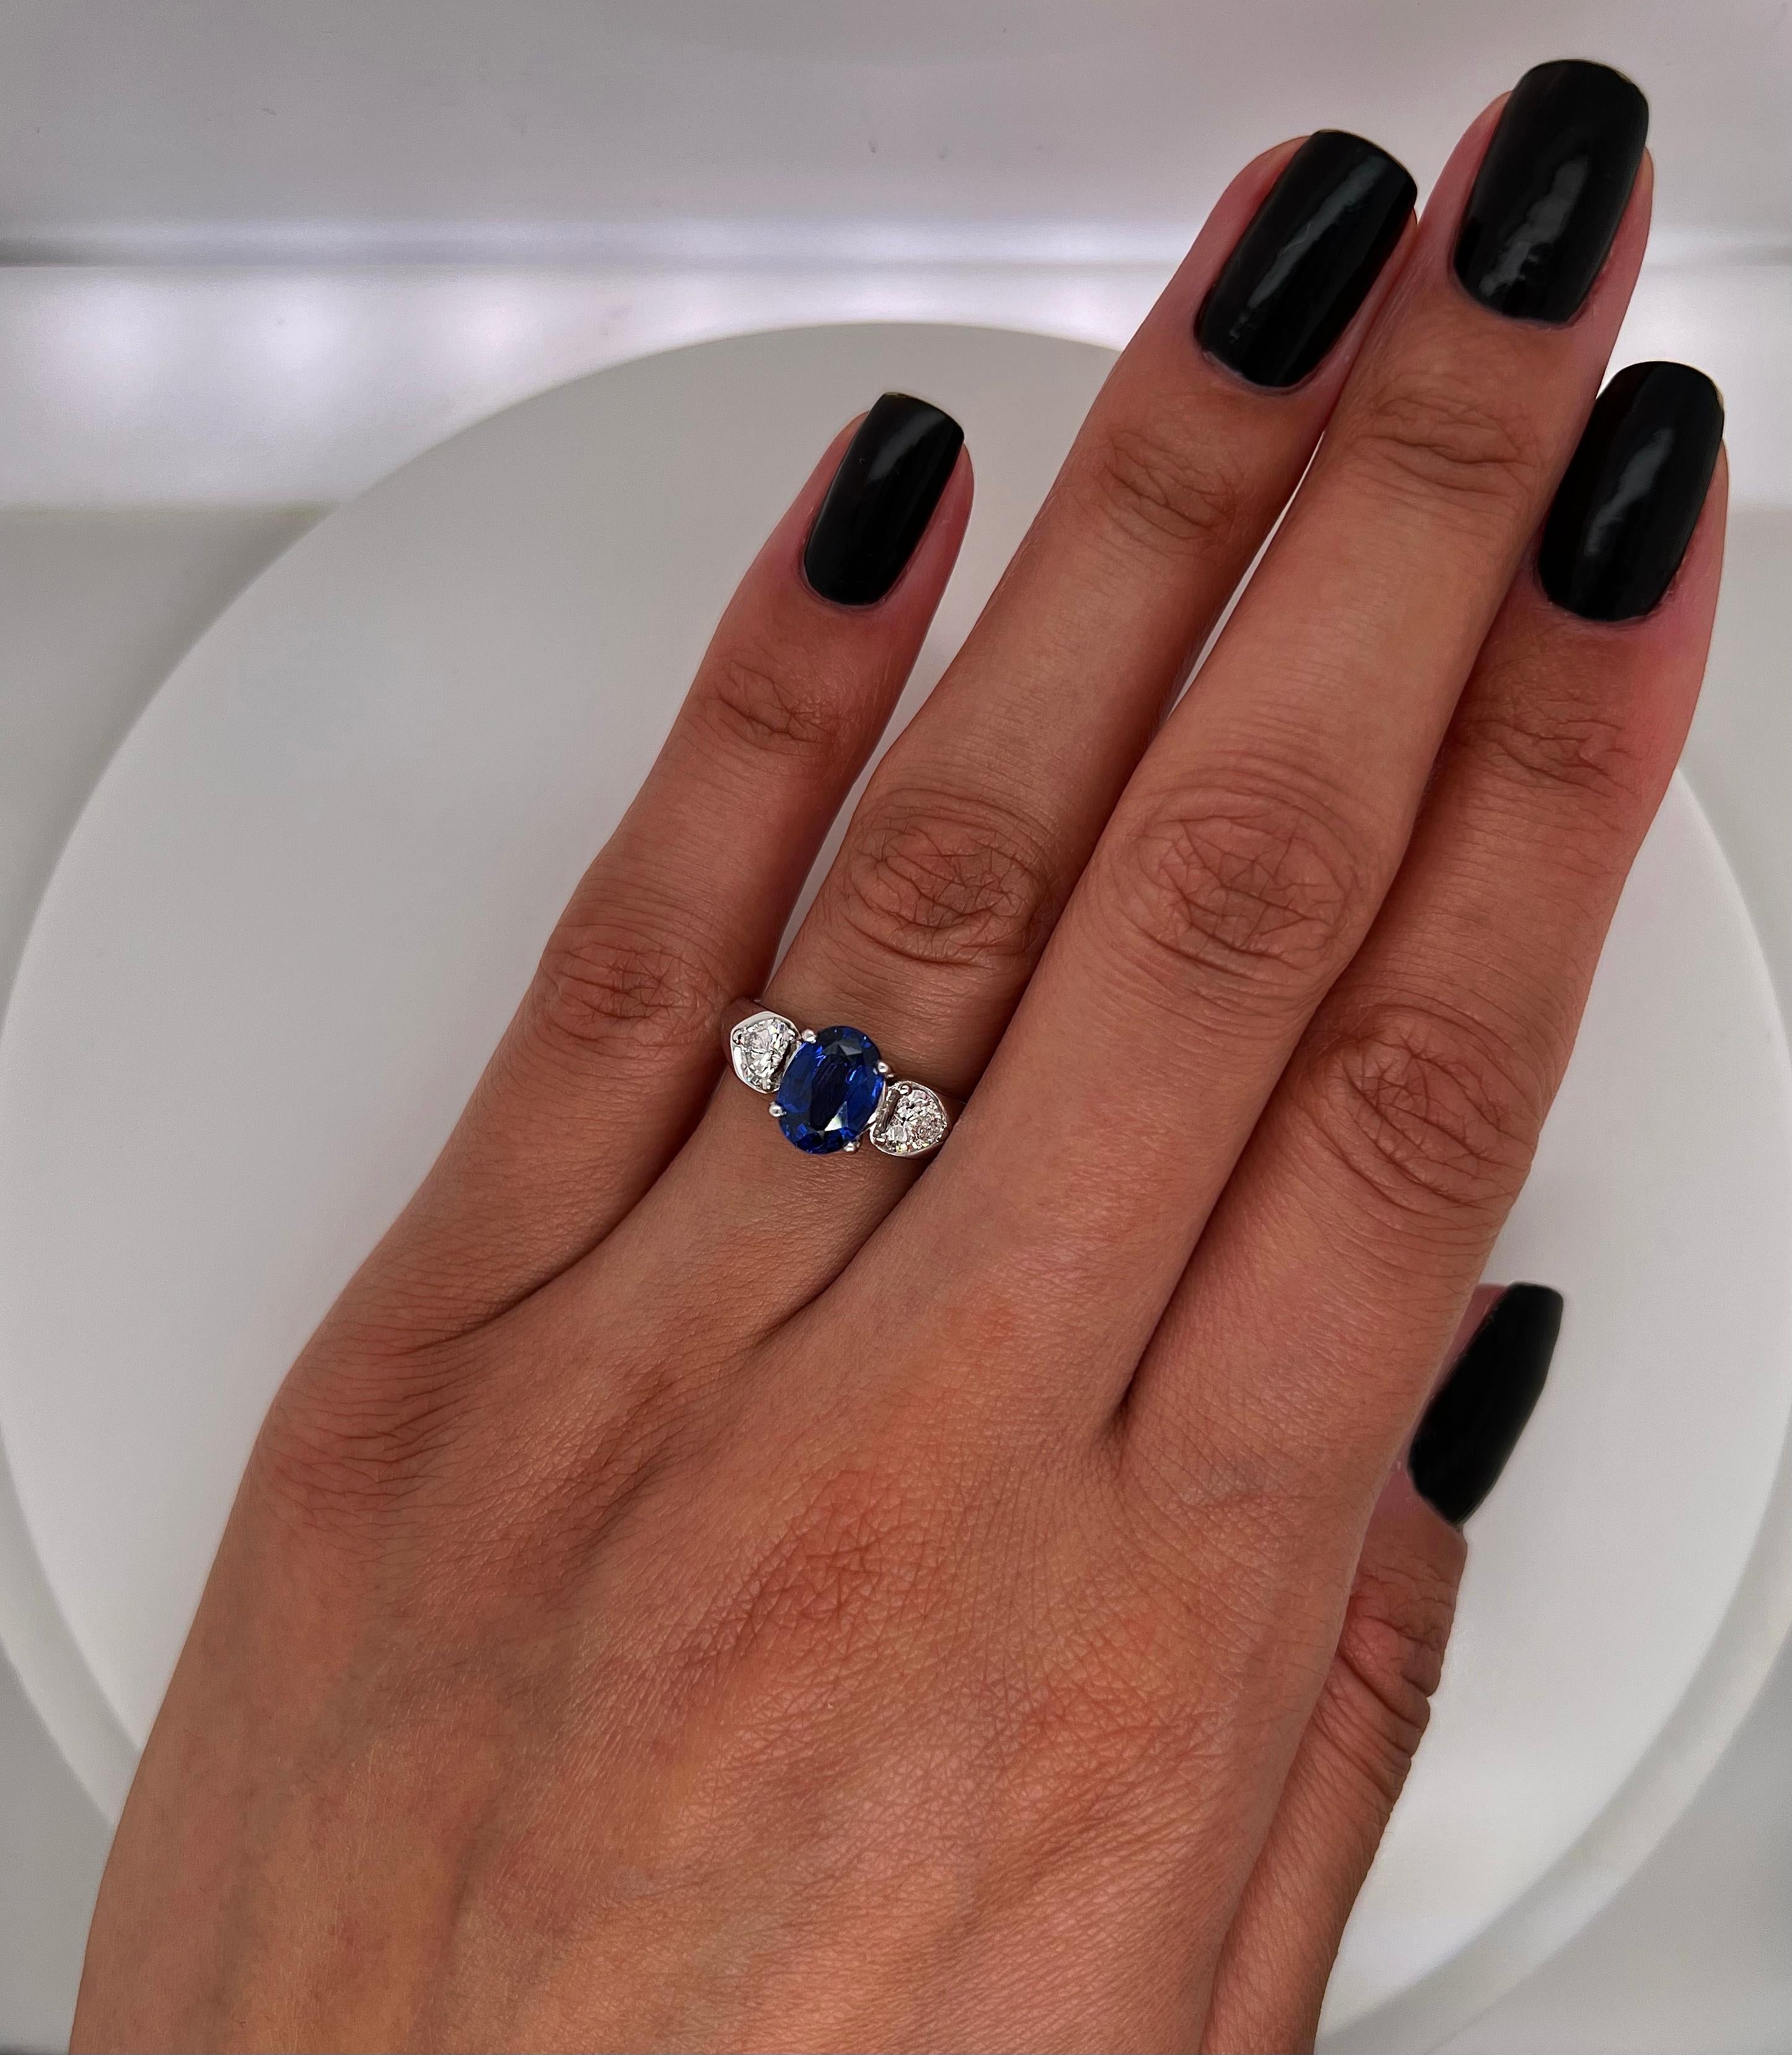 sapphire engagement ring meaning